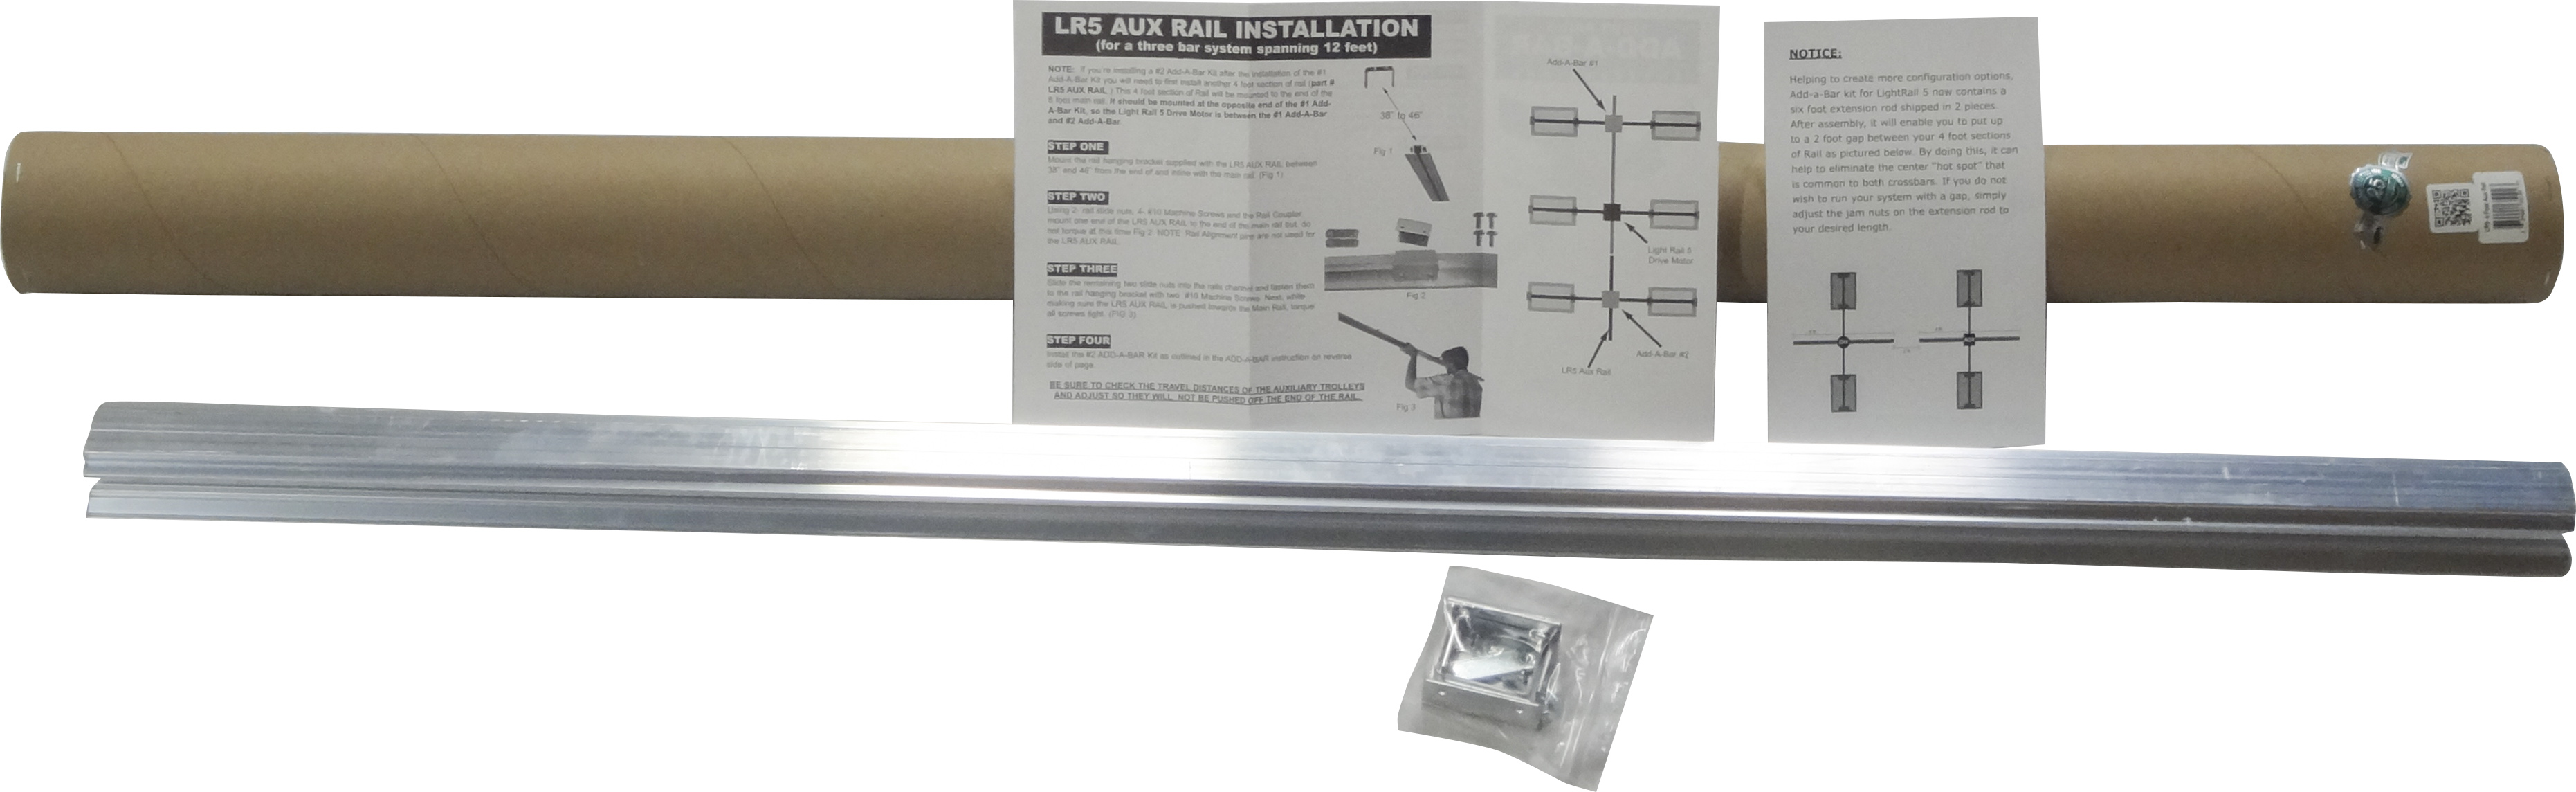 Picture for LightRail 5.0 Auxiliary Rail